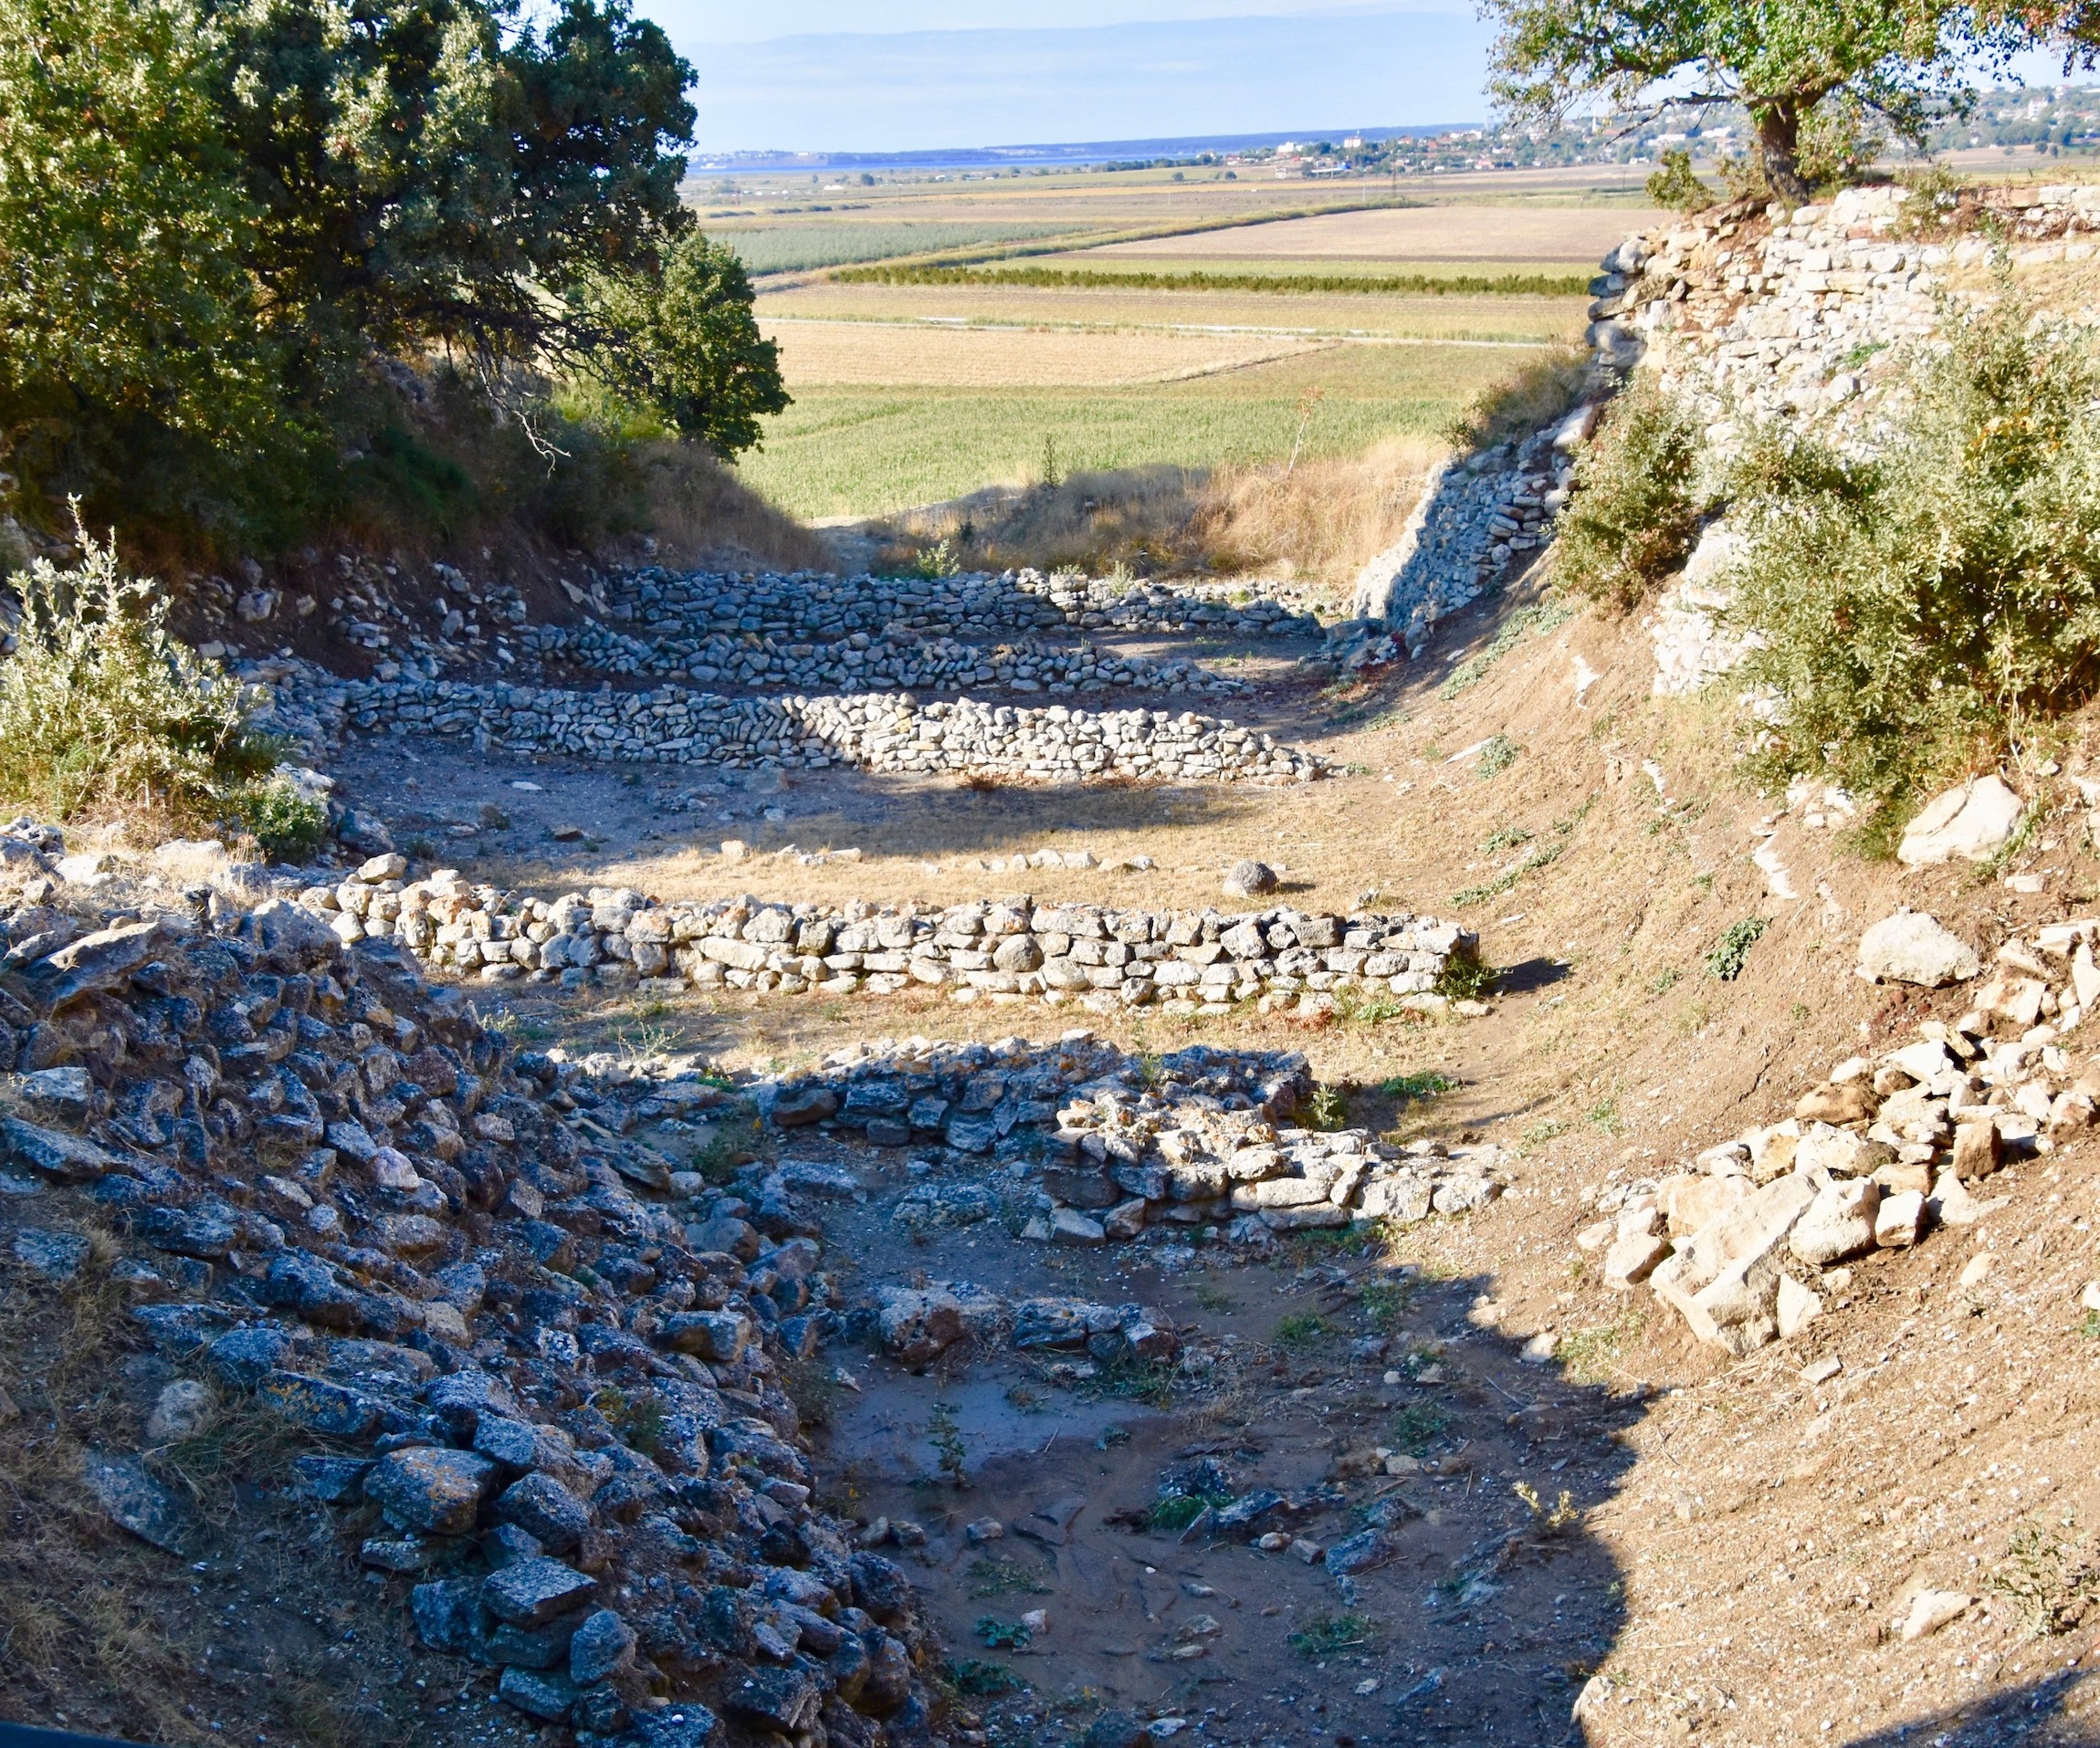 The Schliemann Trench at Troy